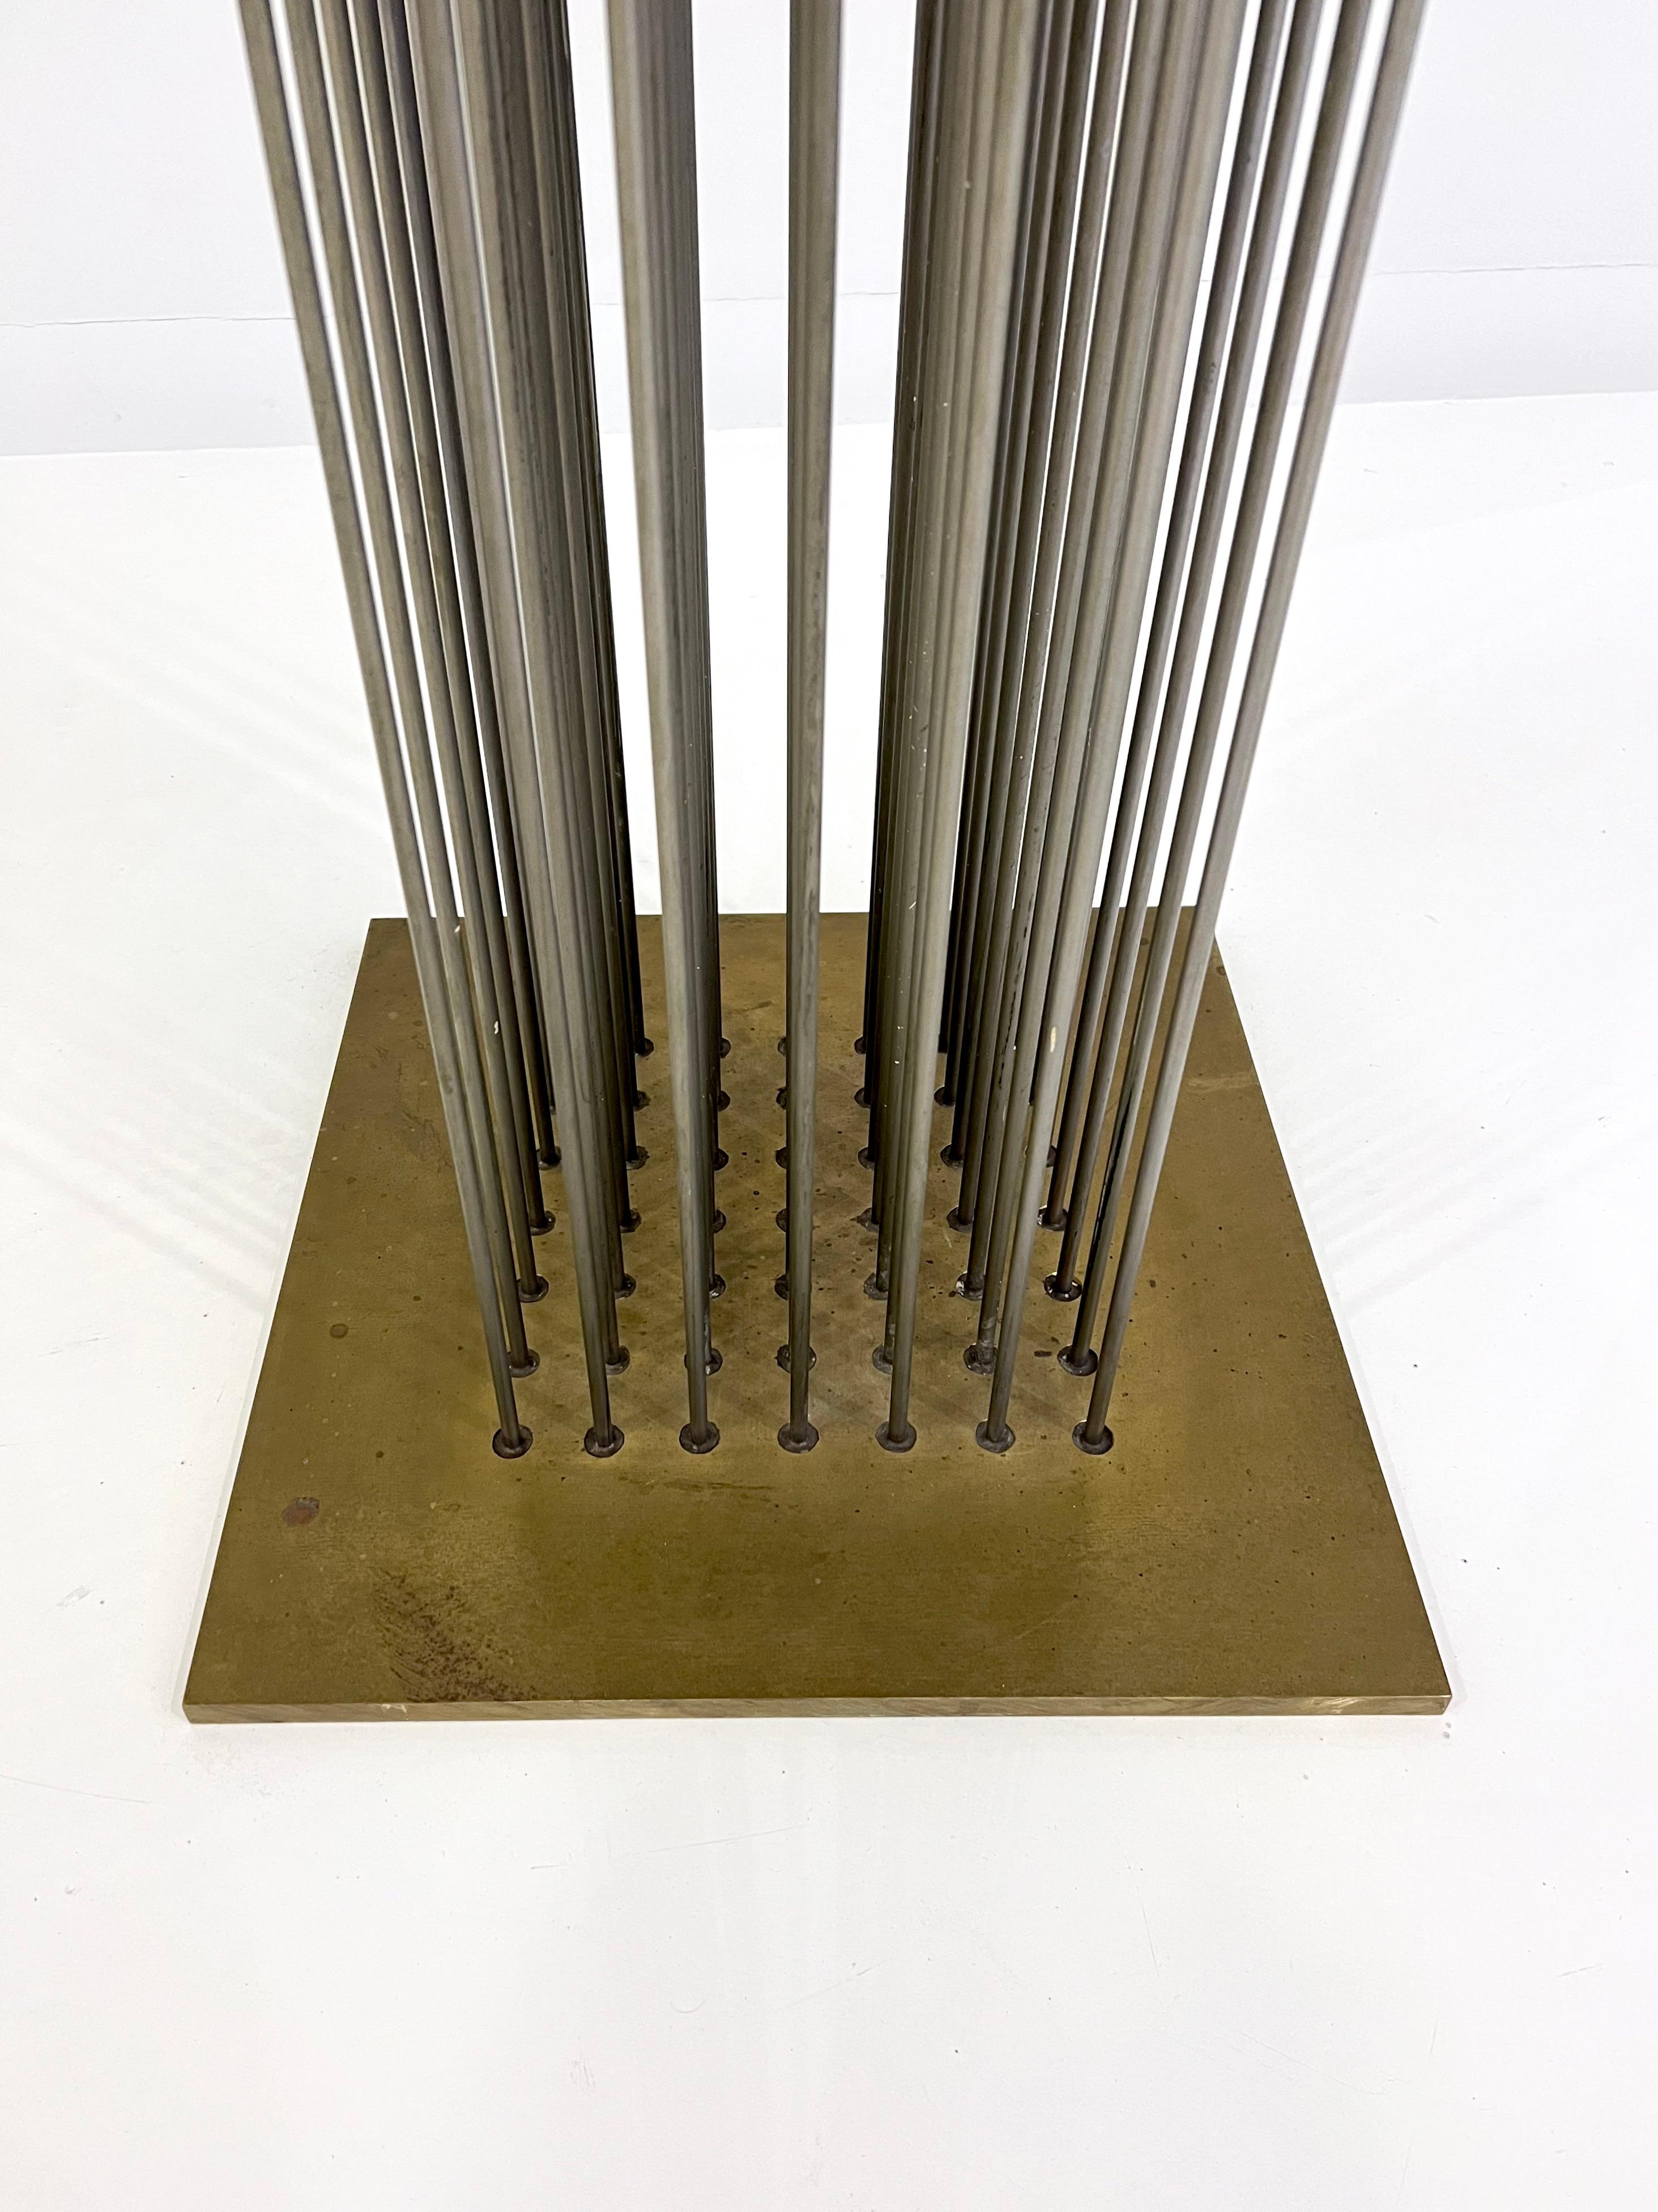 Harry Bertoia, Monumental Sonambient Sculpture In Good Condition For Sale In New York, NY